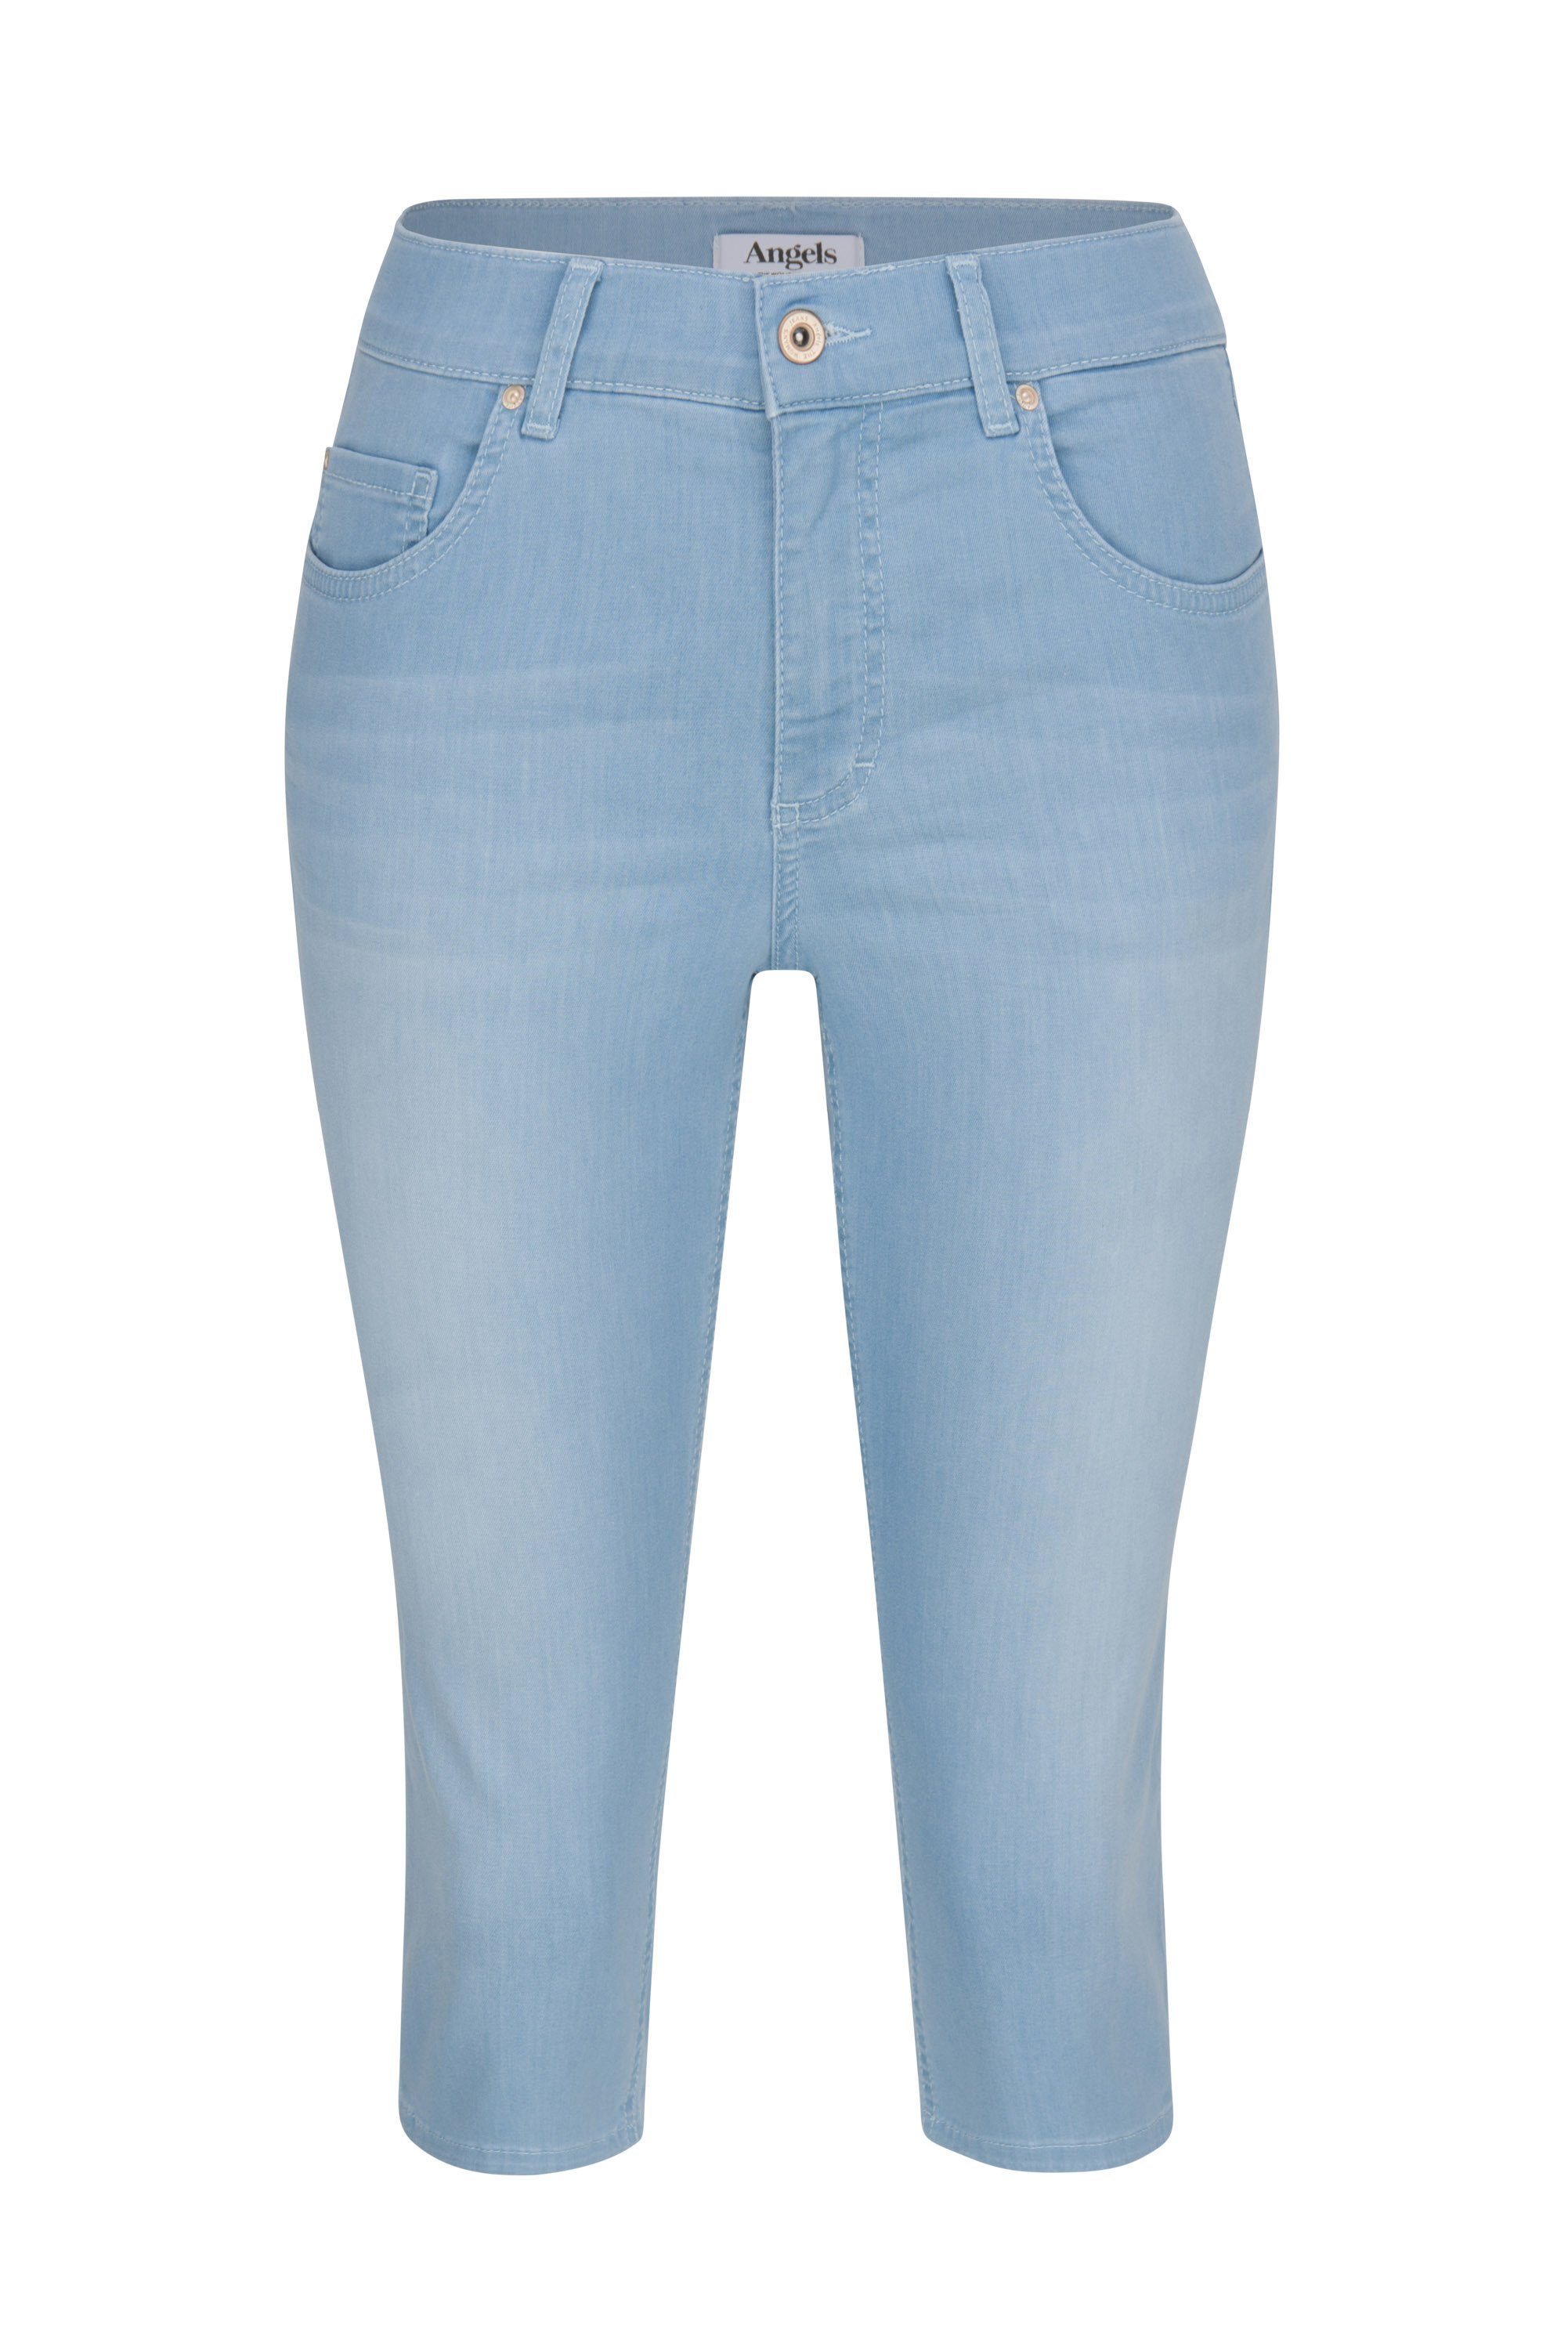 ANGELS Stretch-Jeans ANGELS JEANS ANACAPRI bleached blue used 353 430000.3558